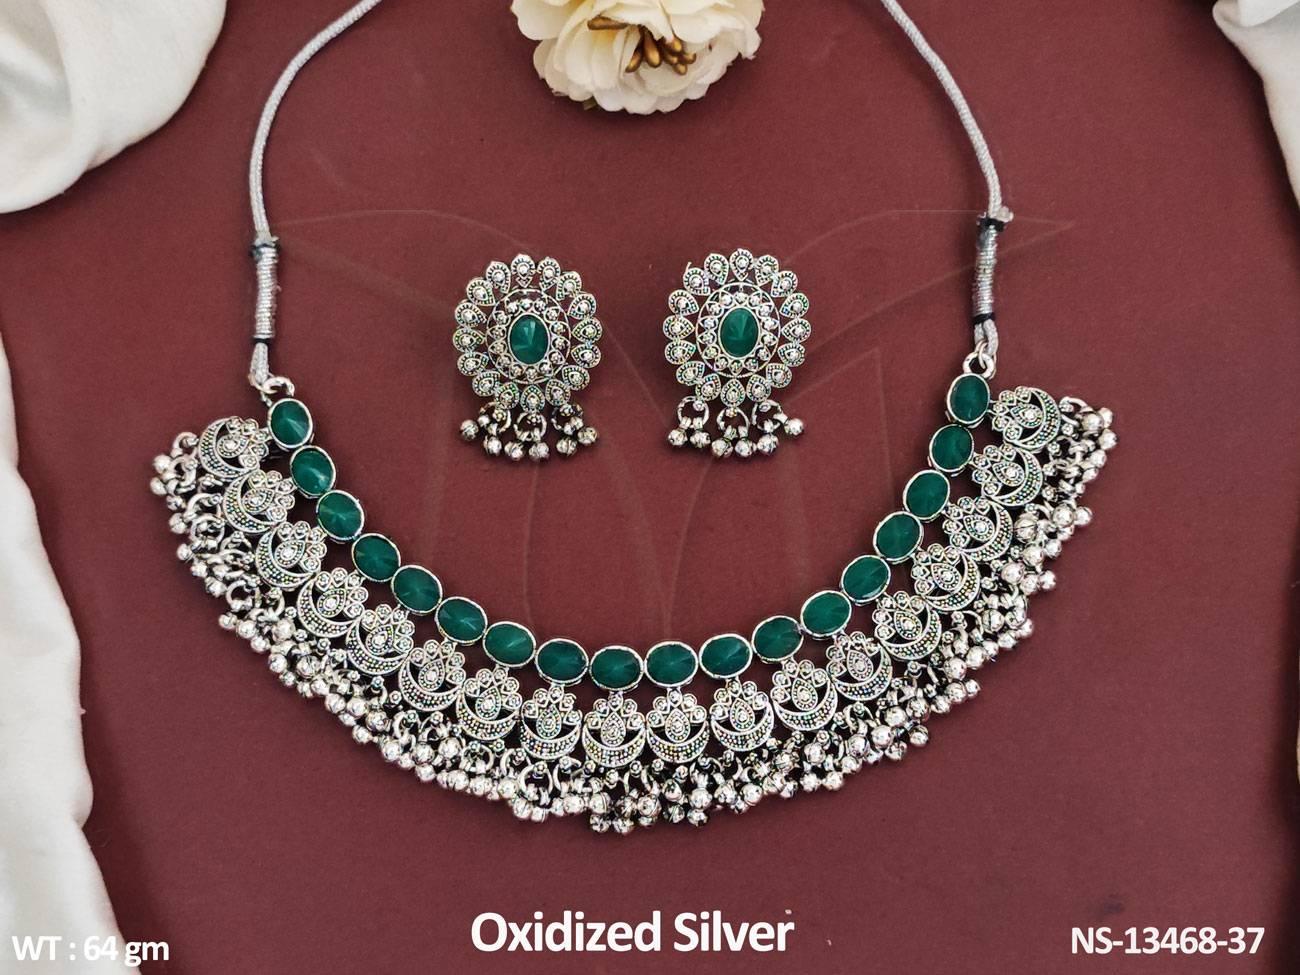 oxidized jewellery set boasts a beautiful design that is perfect for any party. Its elegant and intricate details add a touch of sophistication to any outfit.